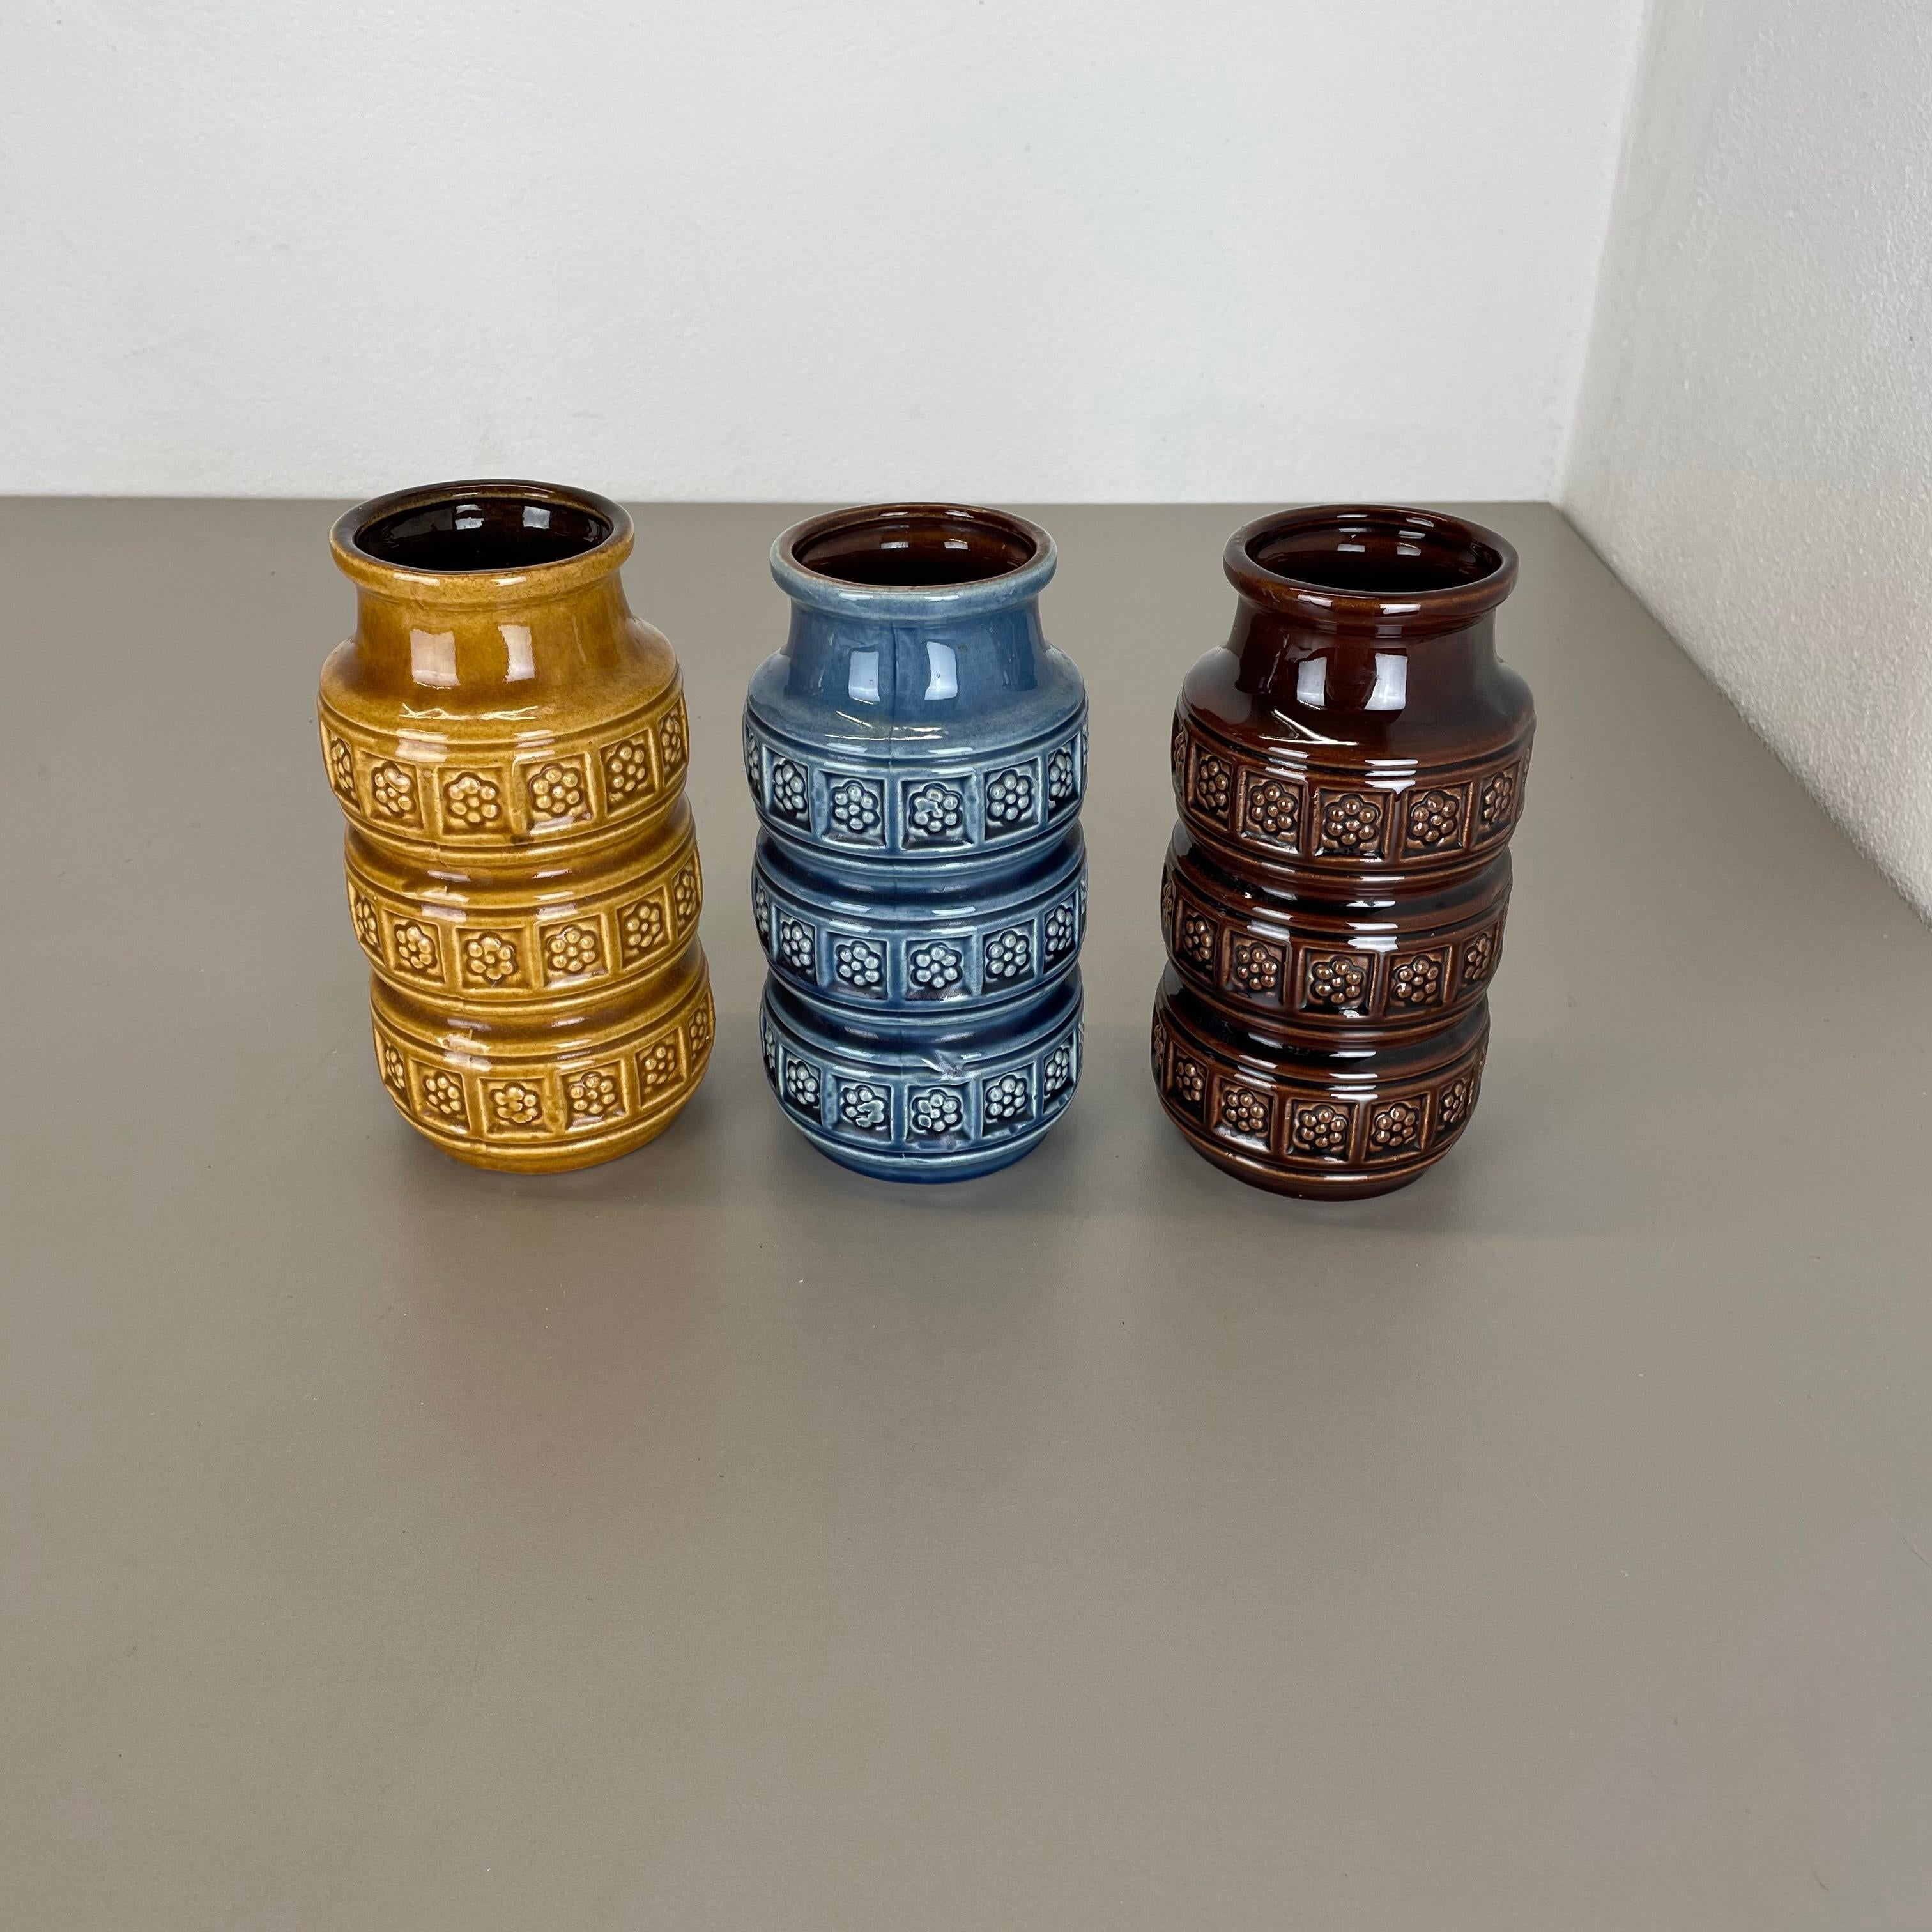 Article:

Set of three fat lava art vases

Model:
268-18



Producer:

Scheurich, Germany



Decade:

1970s




These original vintage vases was produced in the 1970s in Germany. It is made of ceramic pottery in fat lava optic.